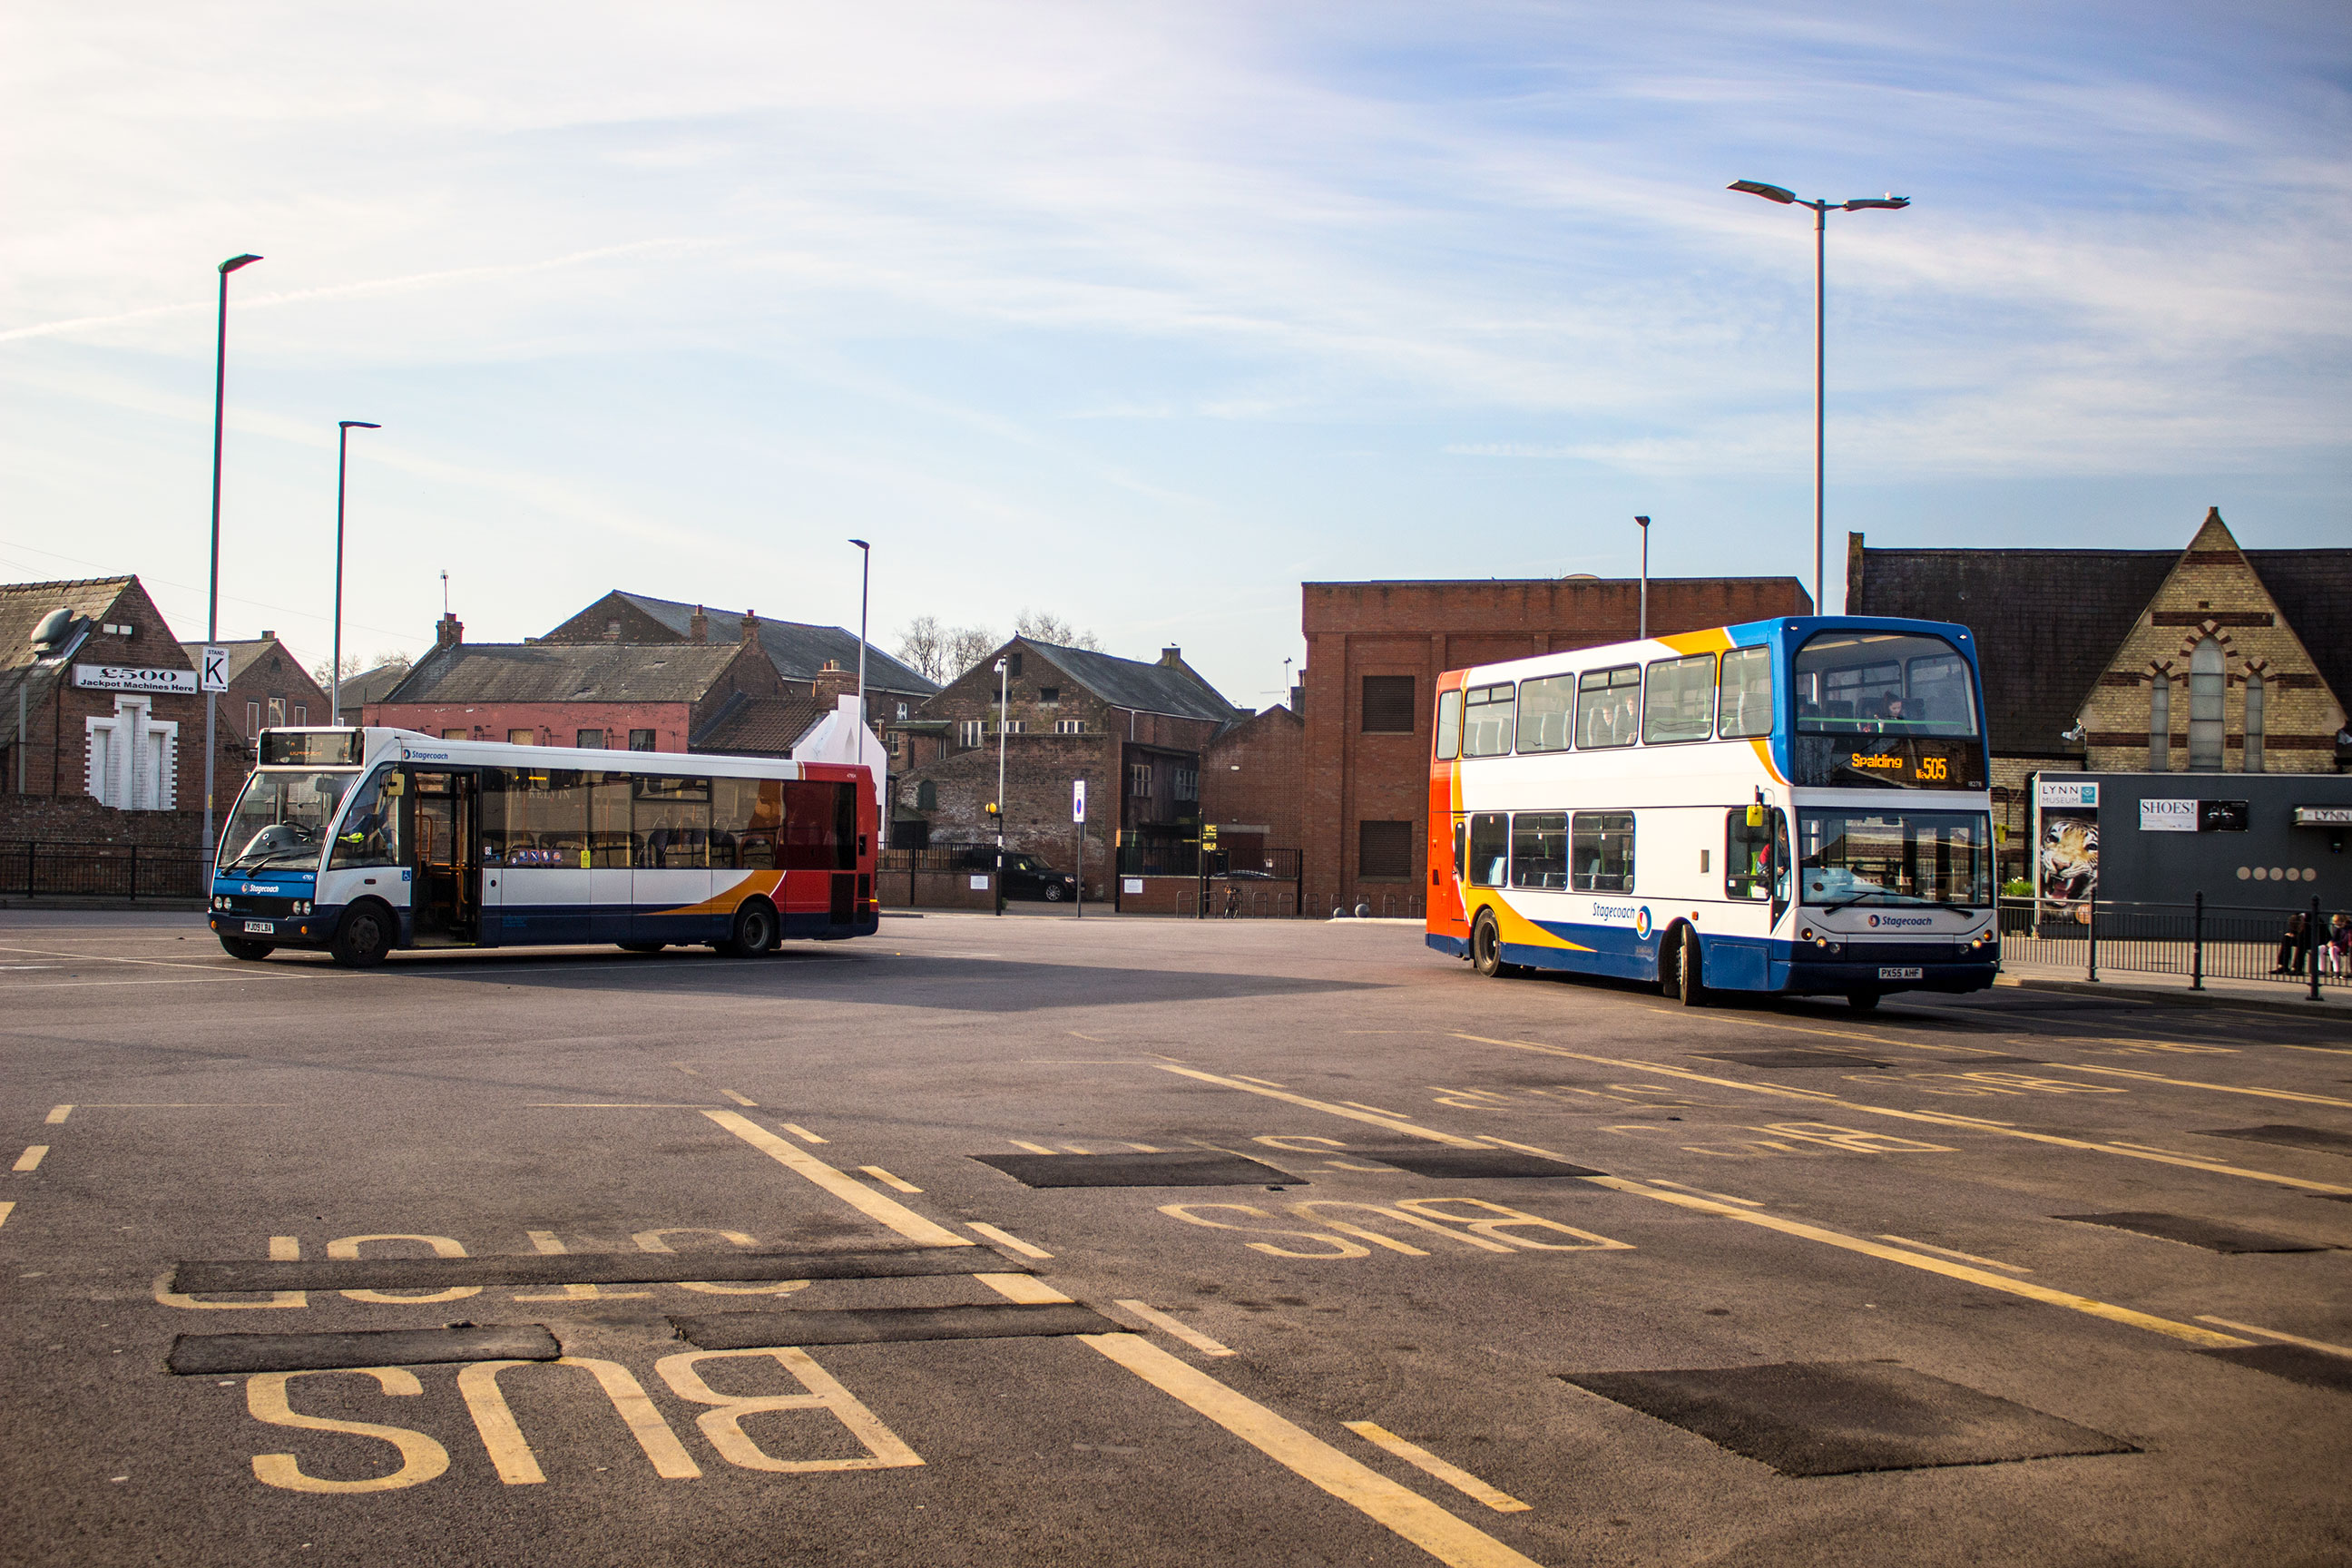 Multiple Stagecoach buses in King's Lynn's bus station